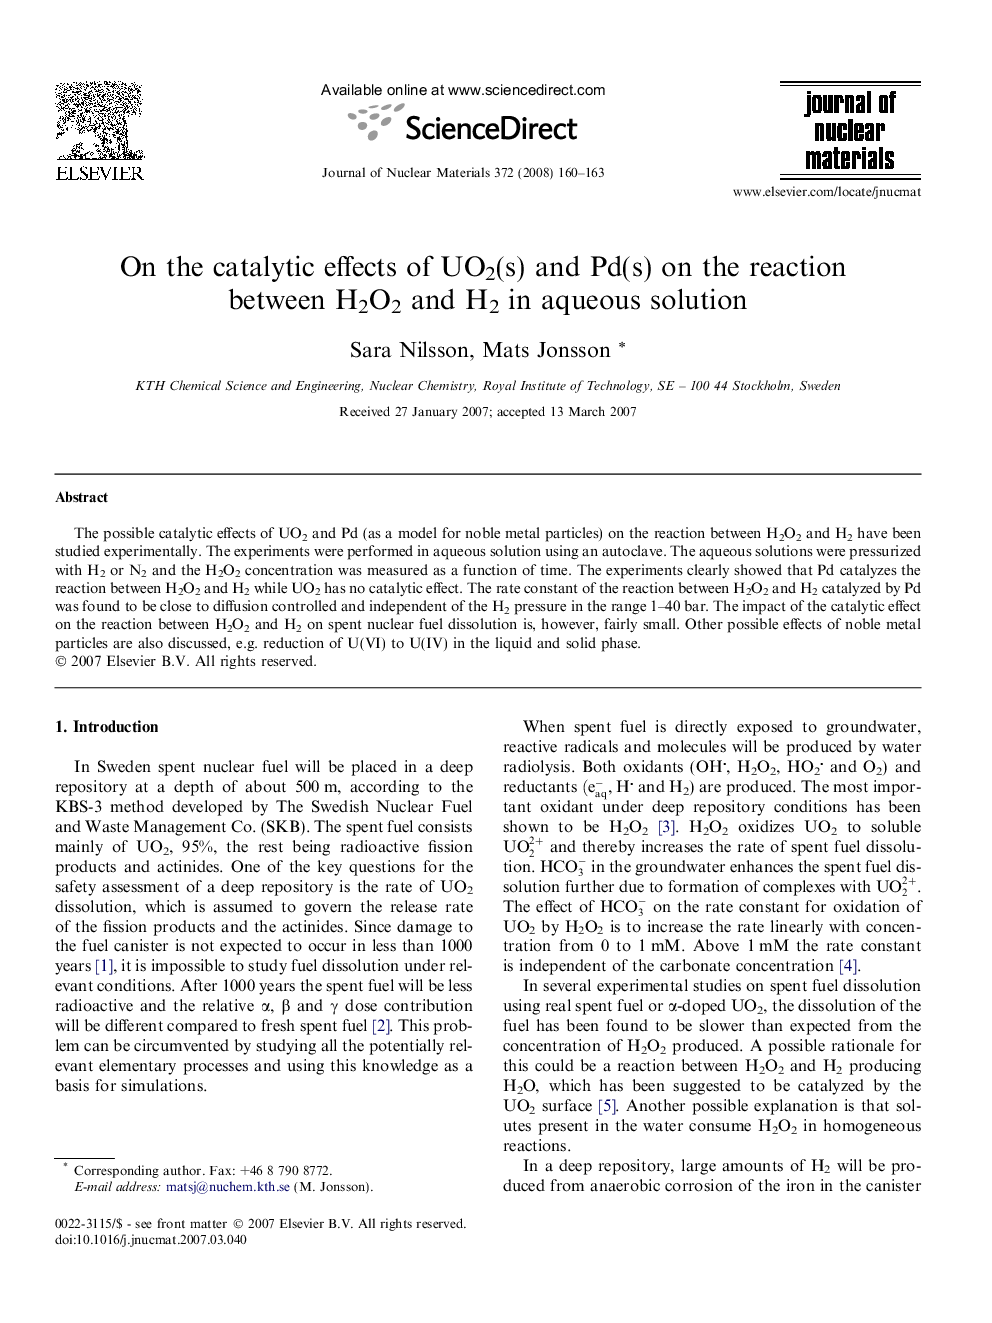 On the catalytic effects of UO2(s) and Pd(s) on the reaction between H2O2 and H2 in aqueous solution